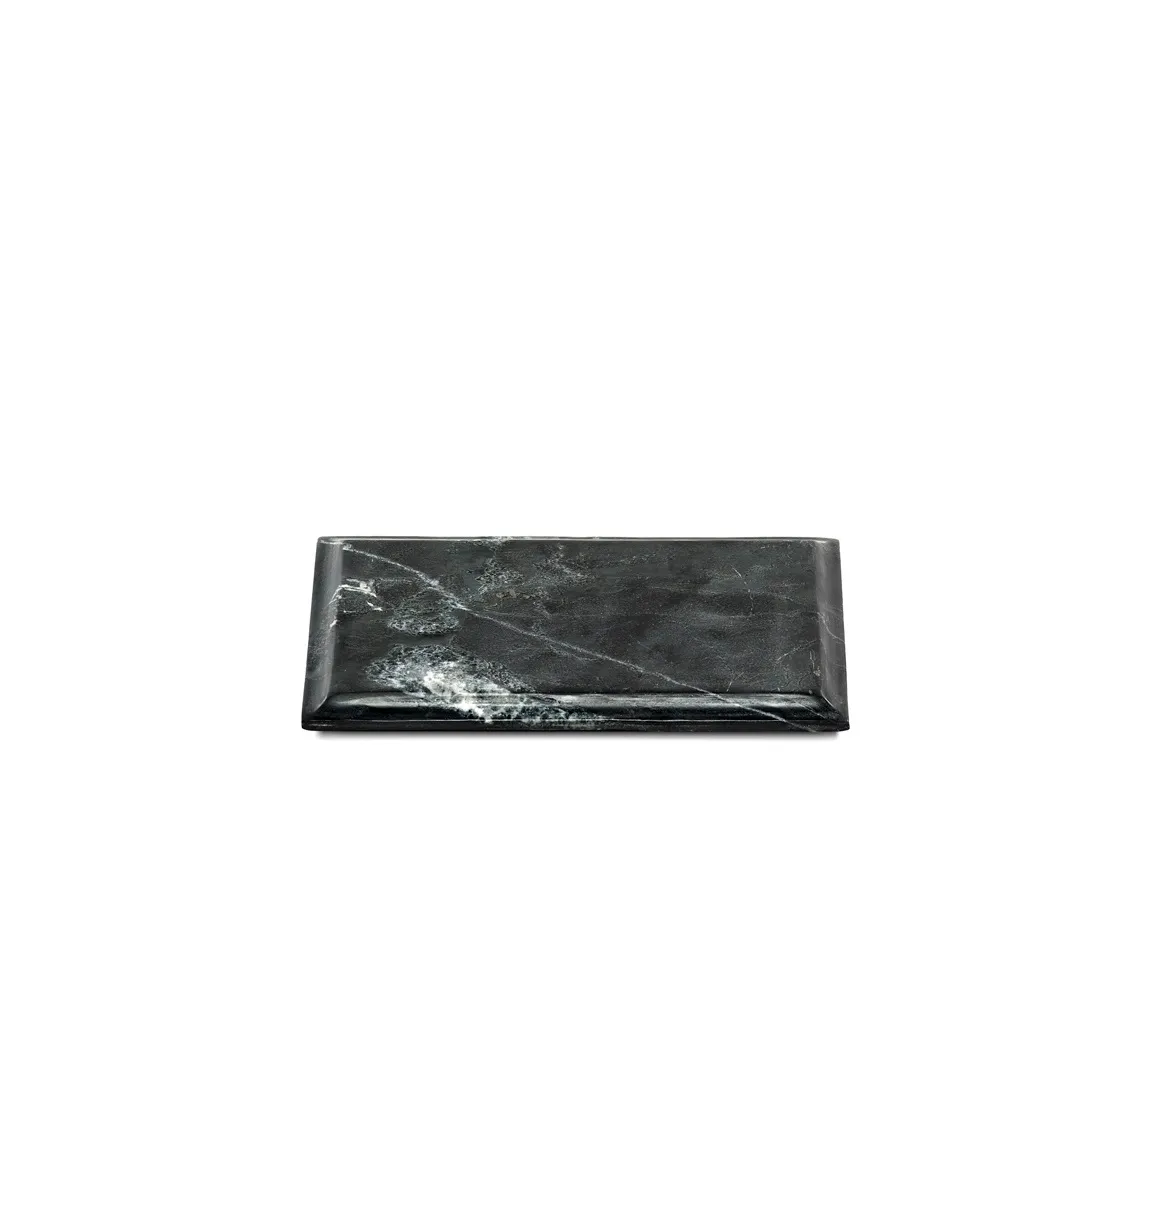 Tray S Black Marble Collect Collection Serax L 20 W 12 H 1.6 CM